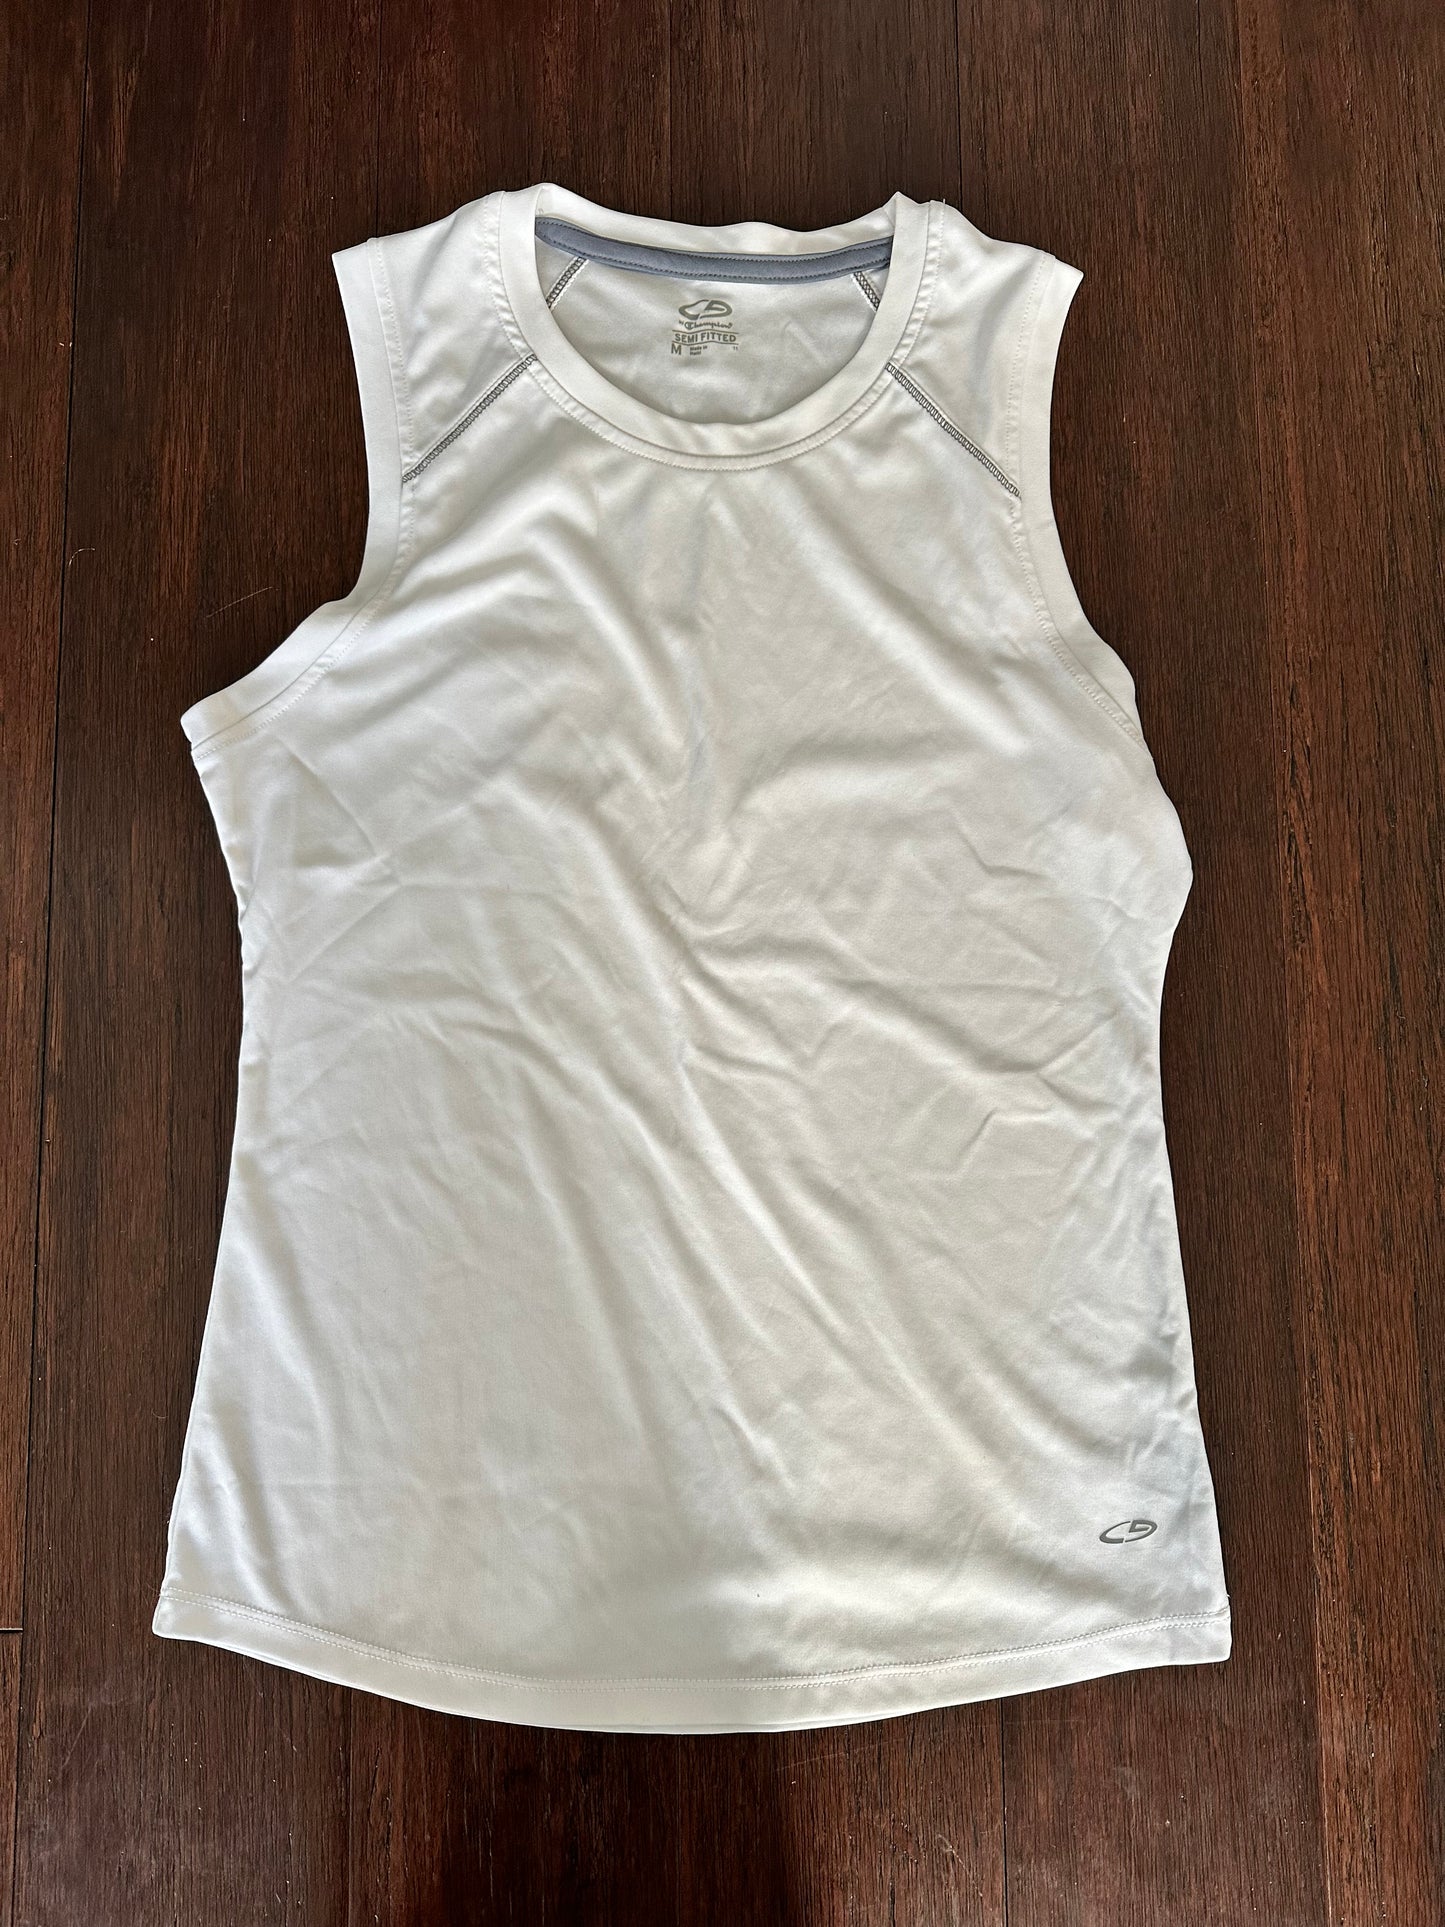 Champion Dry Fit Top, White, Women's M